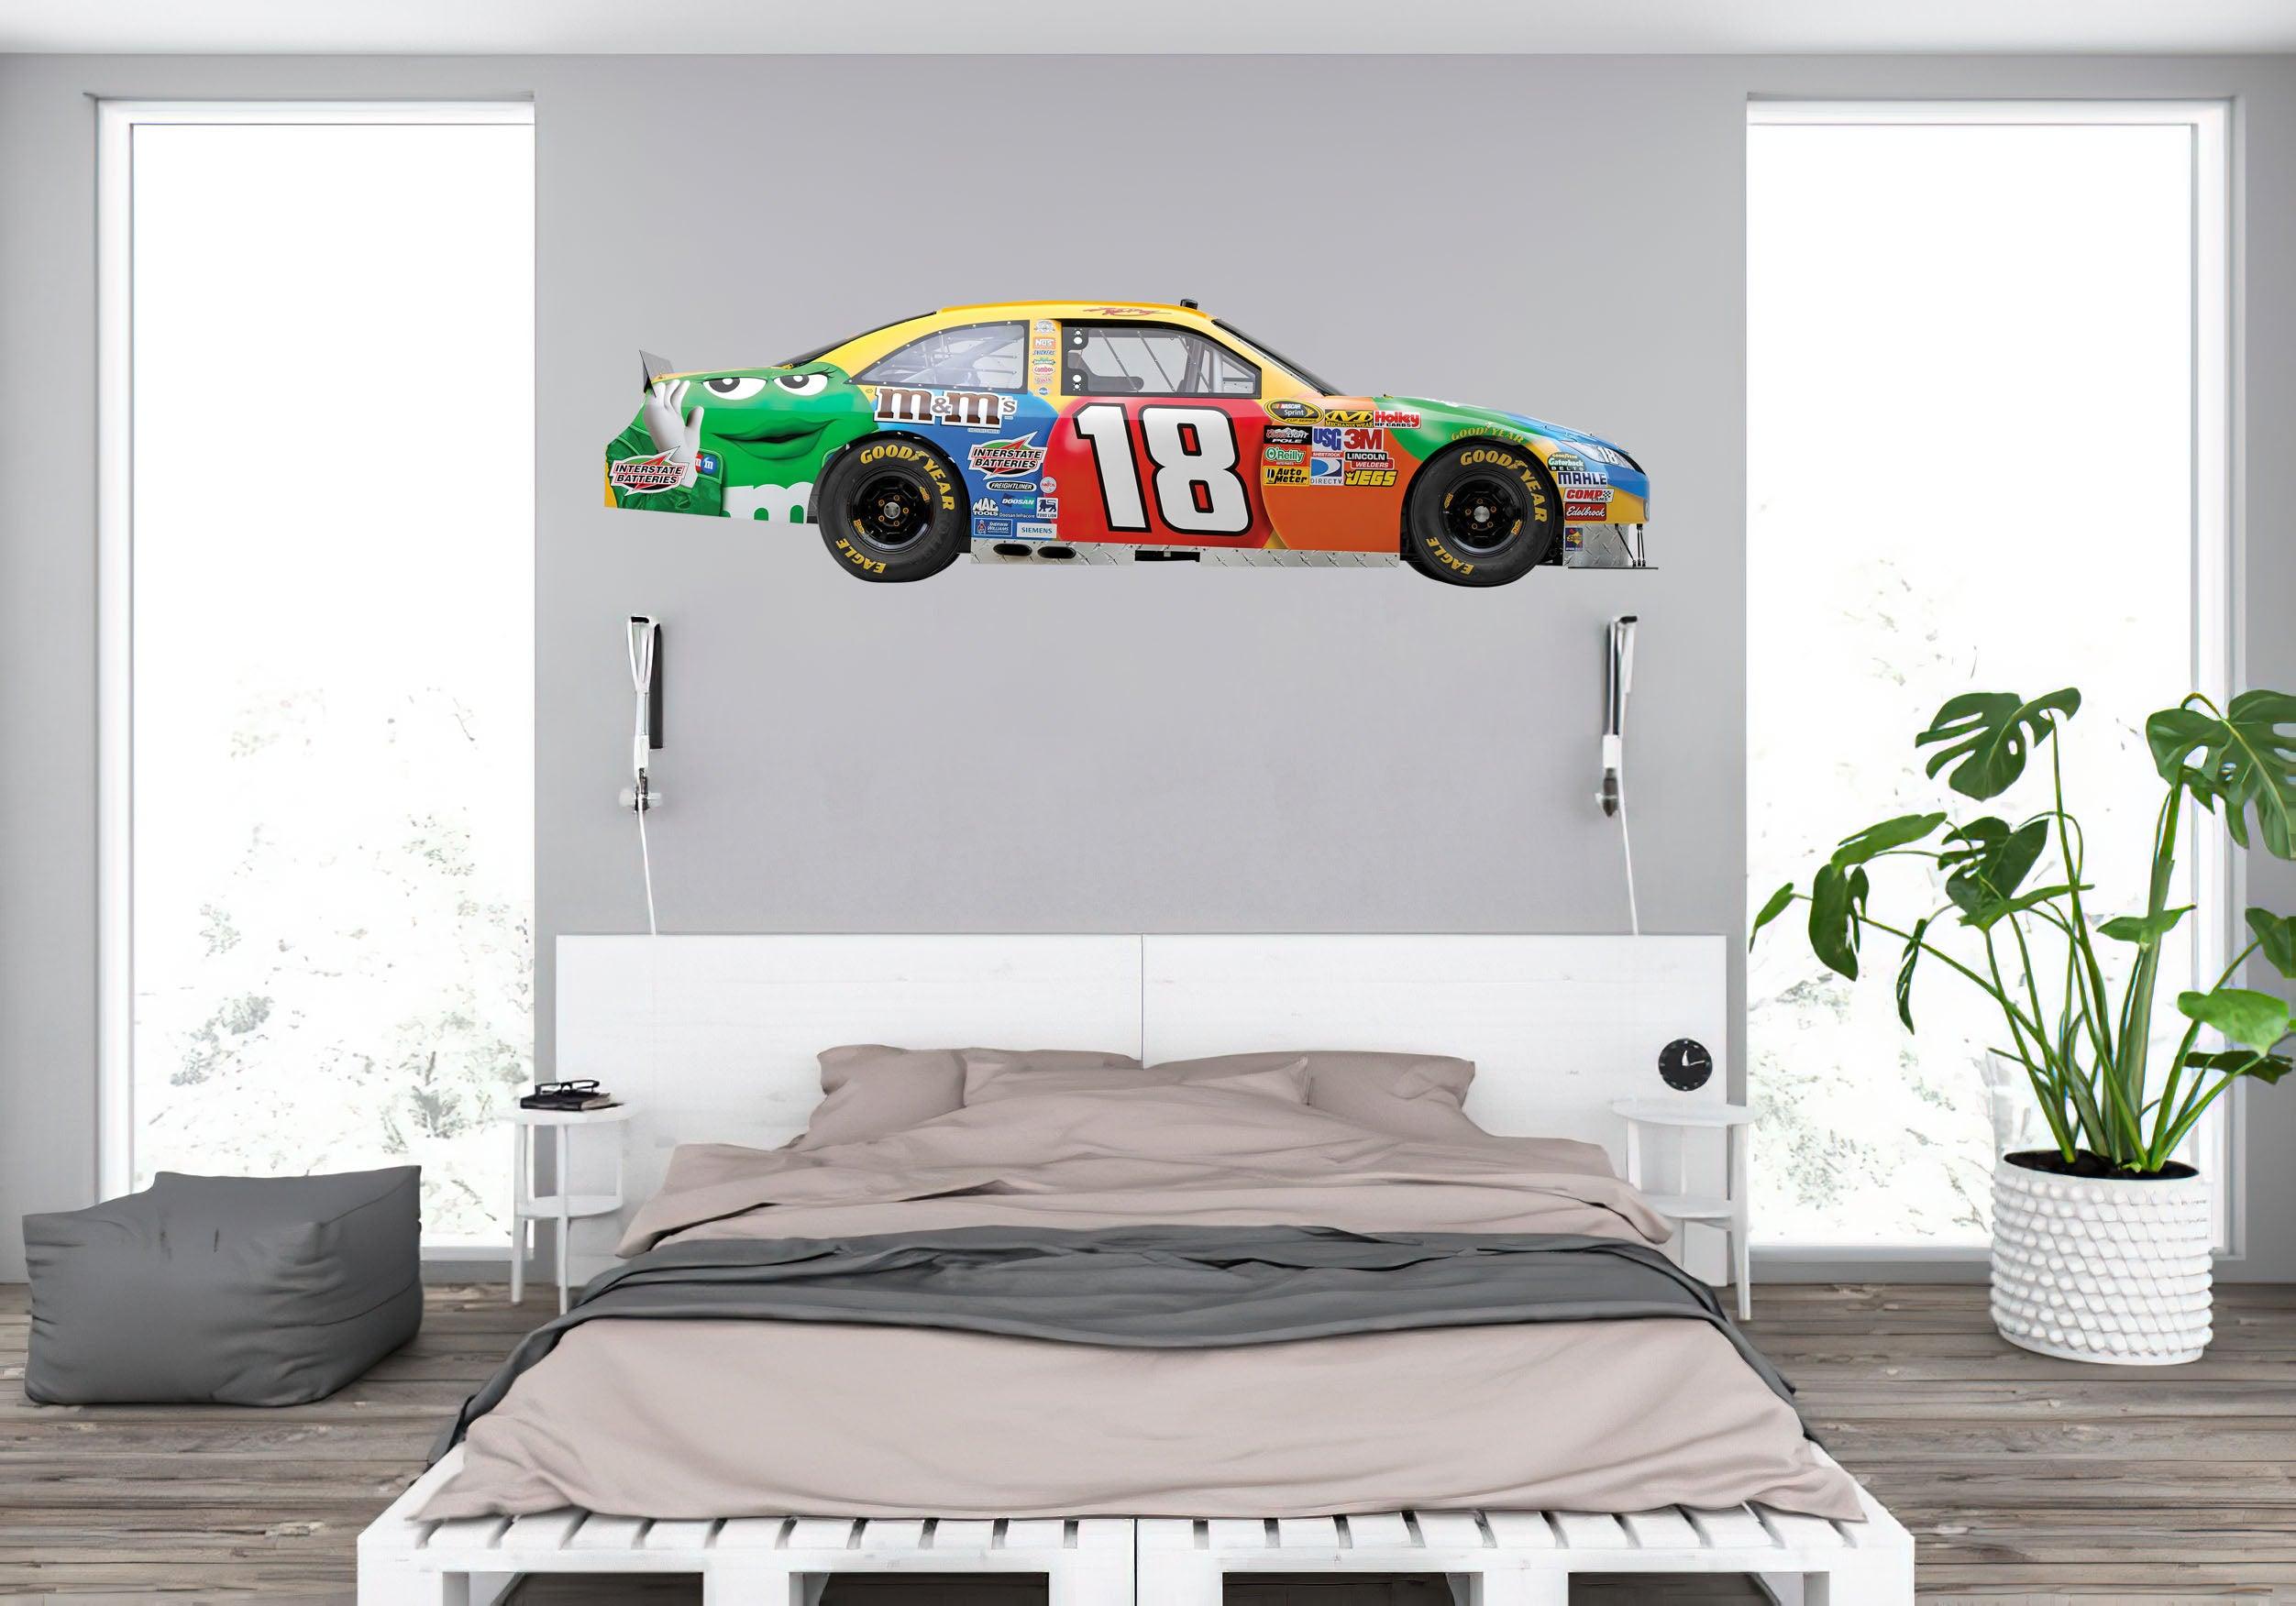 KYLE BUSCH #18 M&M’S TOYOTA 2011 Wall Decal